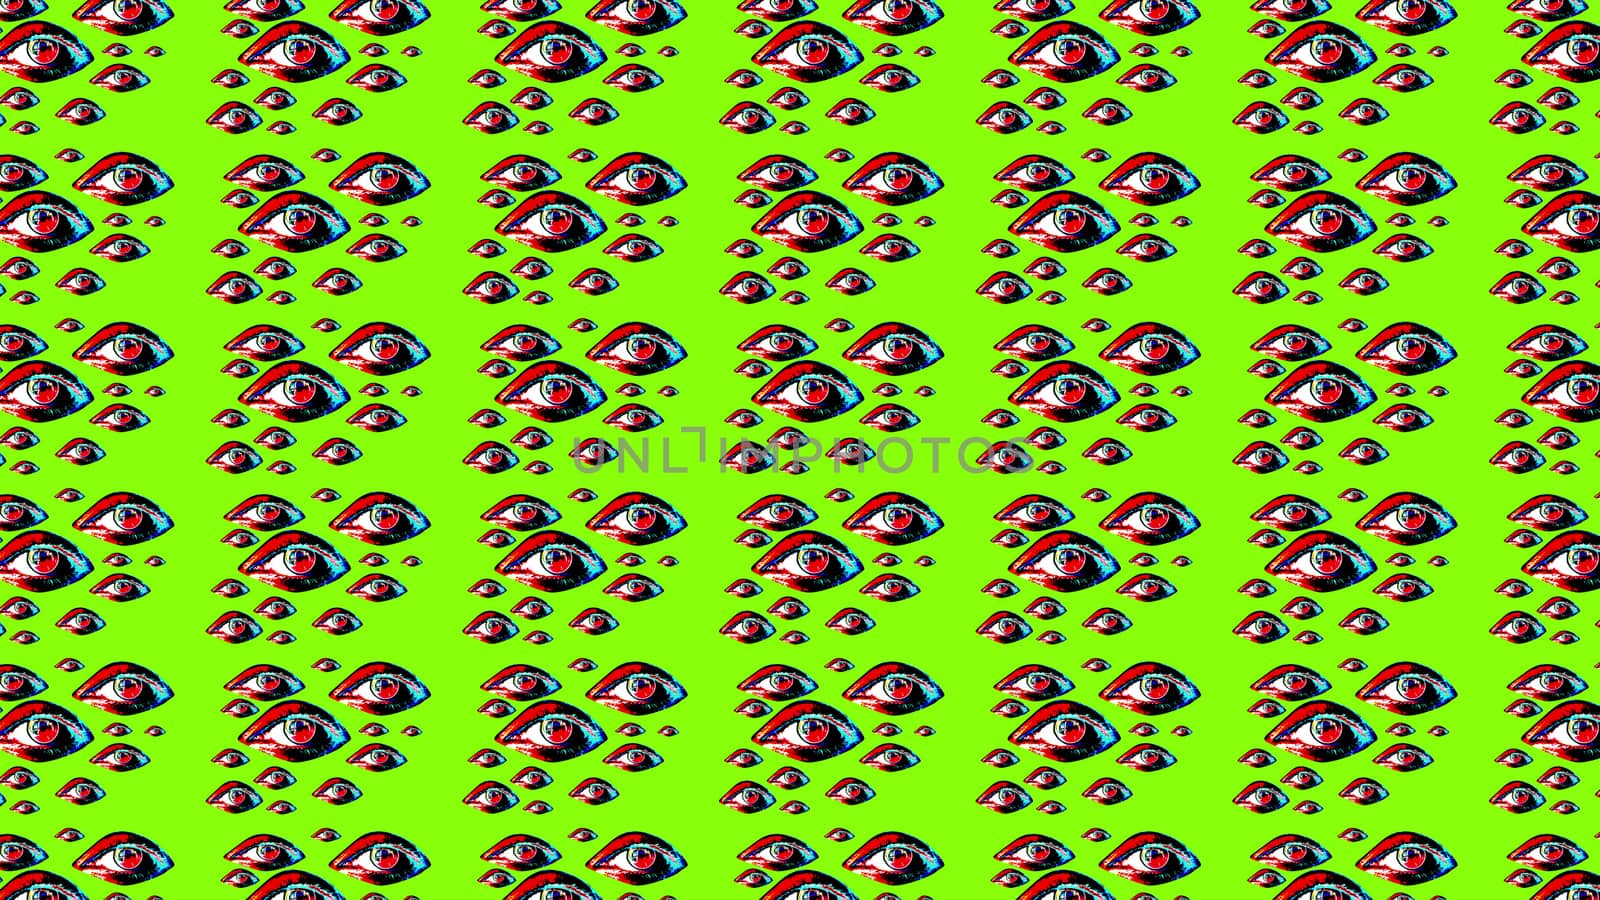 A pop-art 3d illustration of some human eyes on a green background.